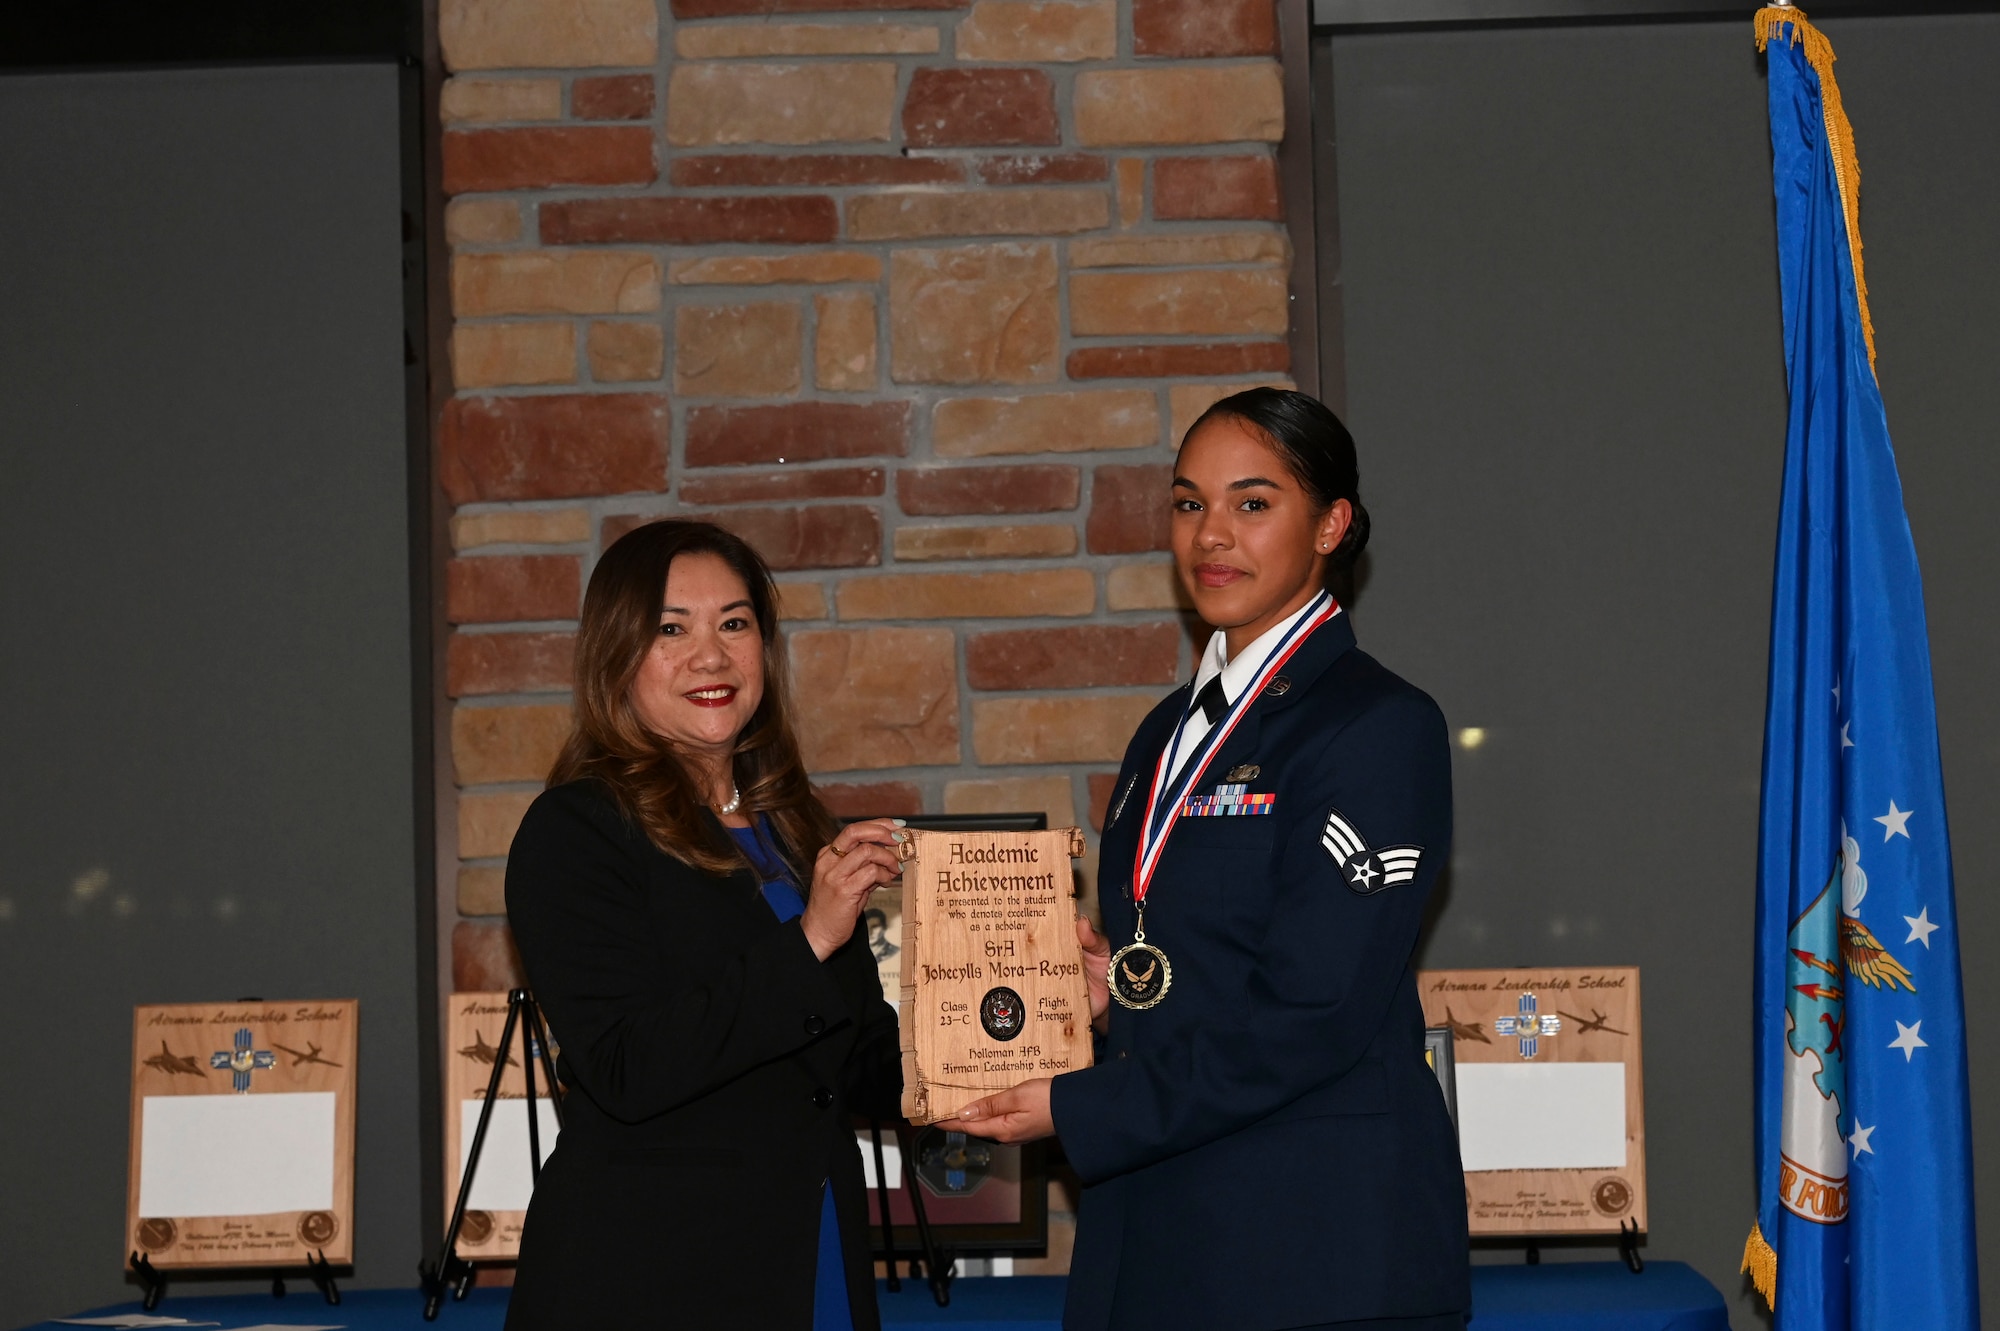 Senior Airman Johecllys Mora Reyes, 49th Security Forces Squadron, installation Airman Leadership School graduate, accepts the Academic Achievement Award during the graduation of ALS class 23-C at Holloman Air Force Base, New Mexico, Feb. 16, 2023. The academic award is presented to the student with the highest overall average on all academic evaluations and demonstrations of leadership. (U.S. Air Force photo by Airman 1st Class Isaiah Pedrazzini)